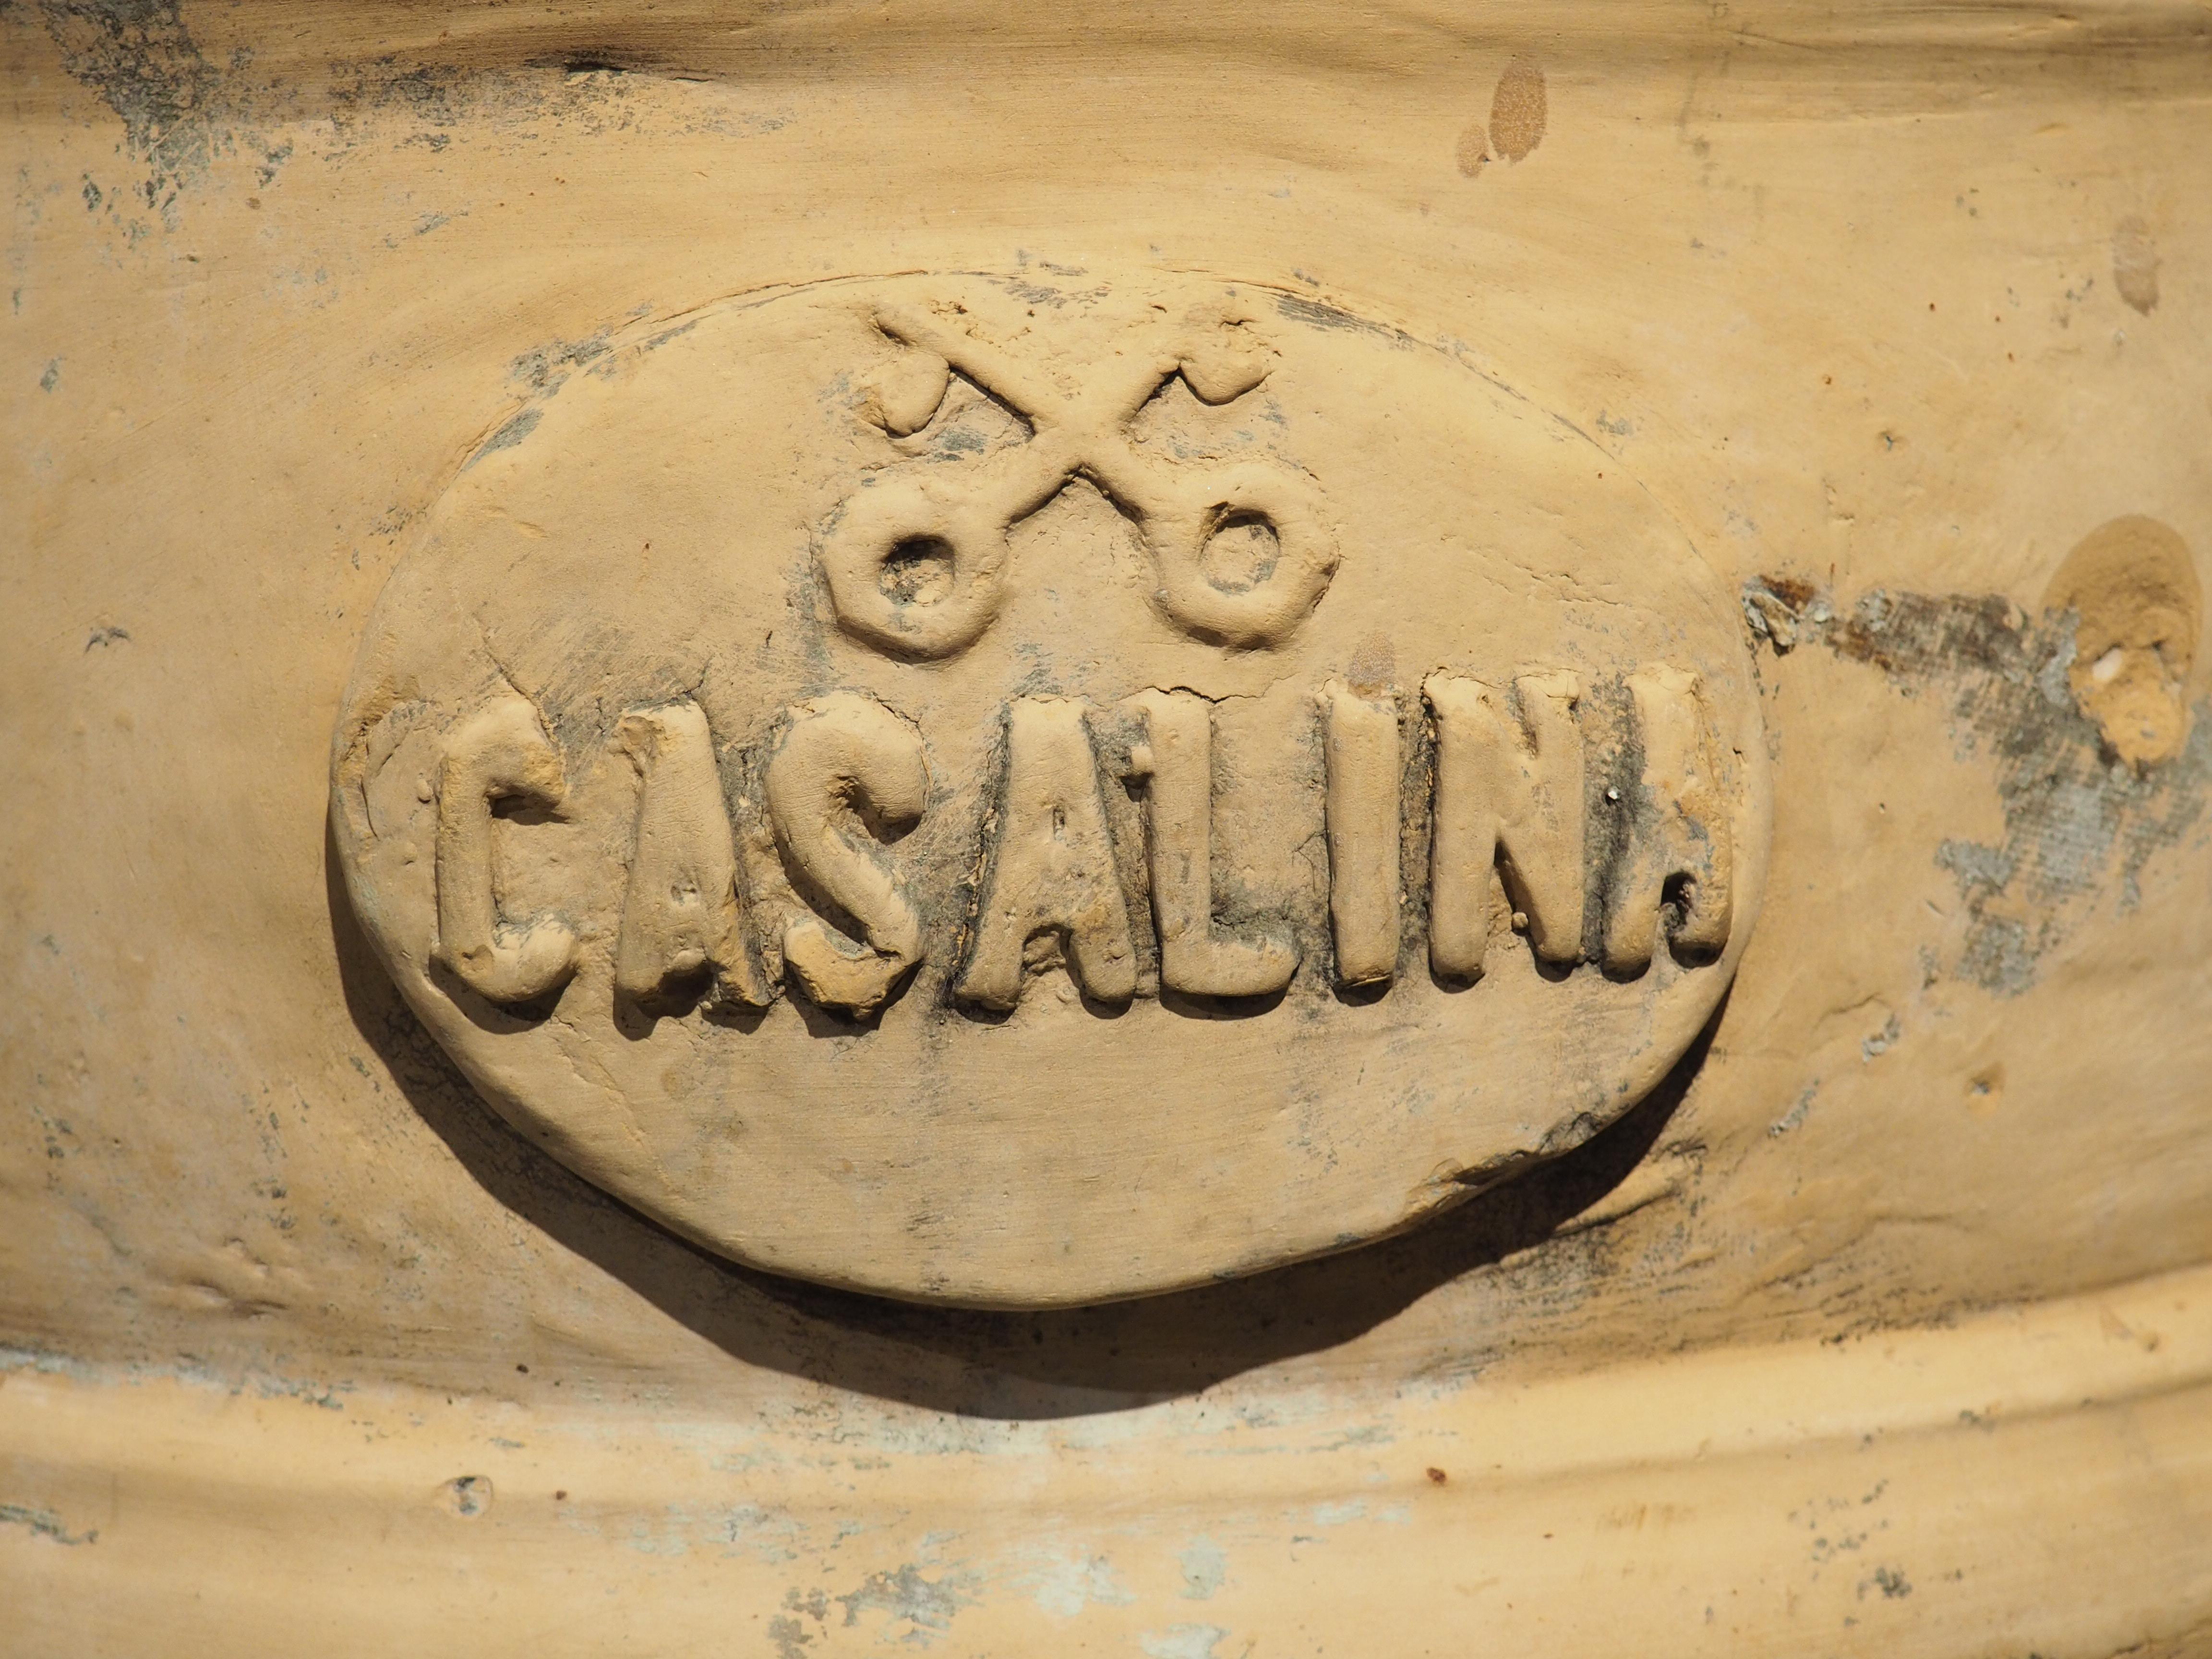 19th Century Antique Terra Cotta Oil or Grains Jar from Casalina, Italy, Dated 1887